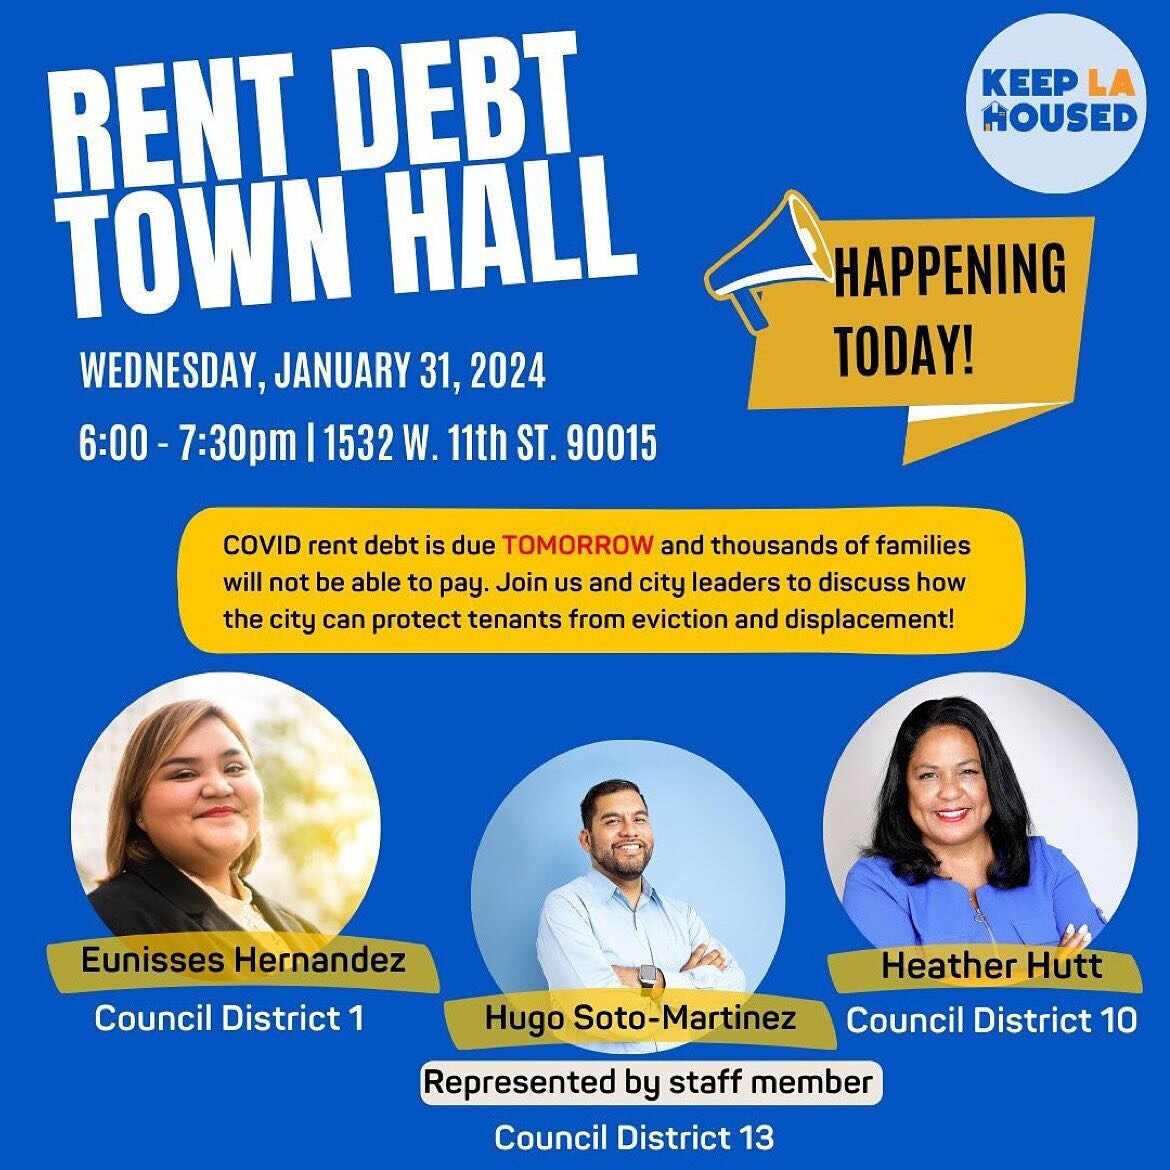 Repost from @keeplahoused
&bull;
🚨Today fam🚨Join us for a town hall tonight where we&rsquo;ll hear directly from the council offices of @cd1losangeles @cw_heather.hutt @cd13losangeles to discuss rent debt and ask our city leaders how they plan to a